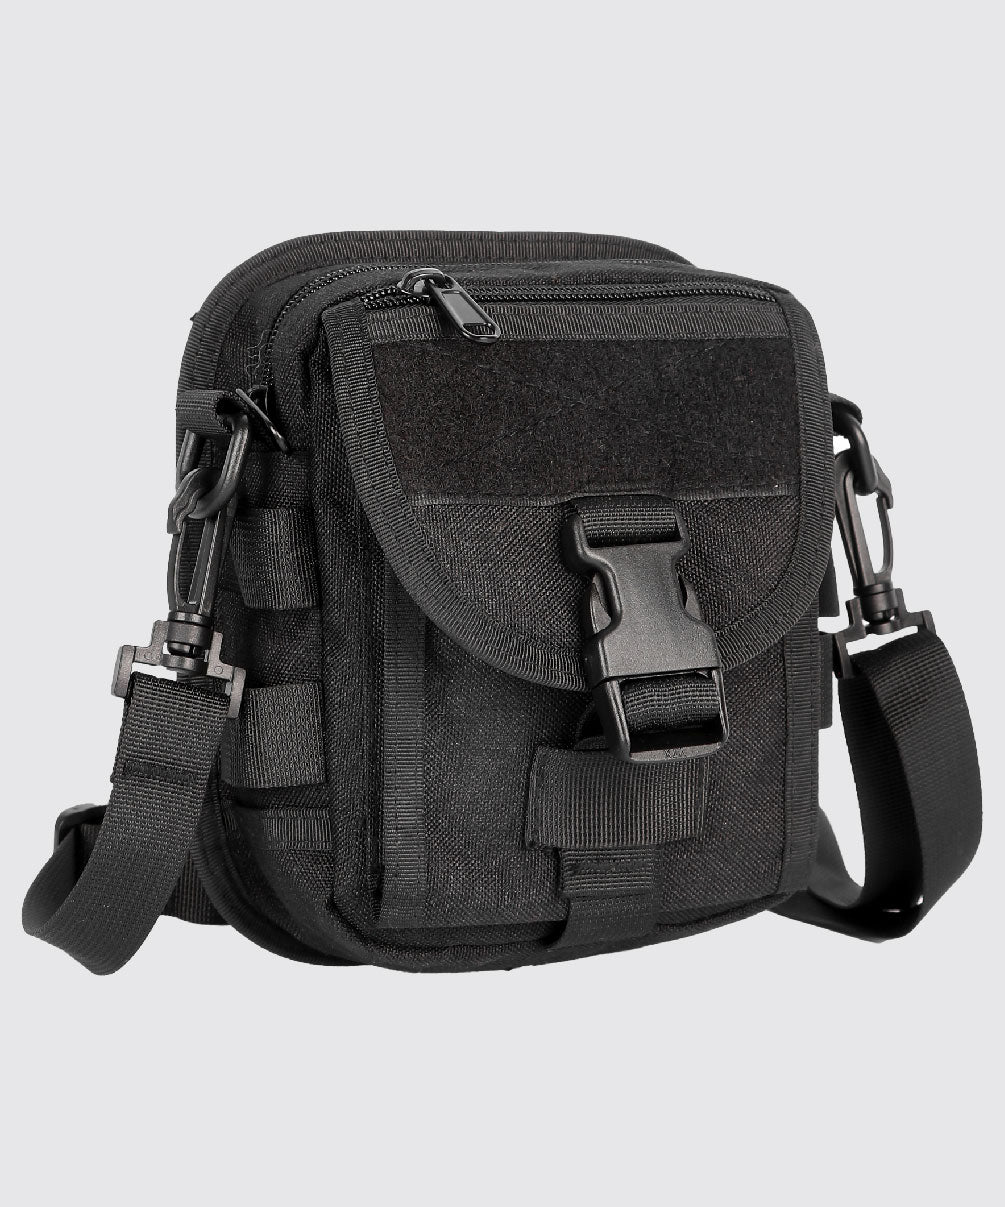 Puppy Tactical Sling Bags for Men